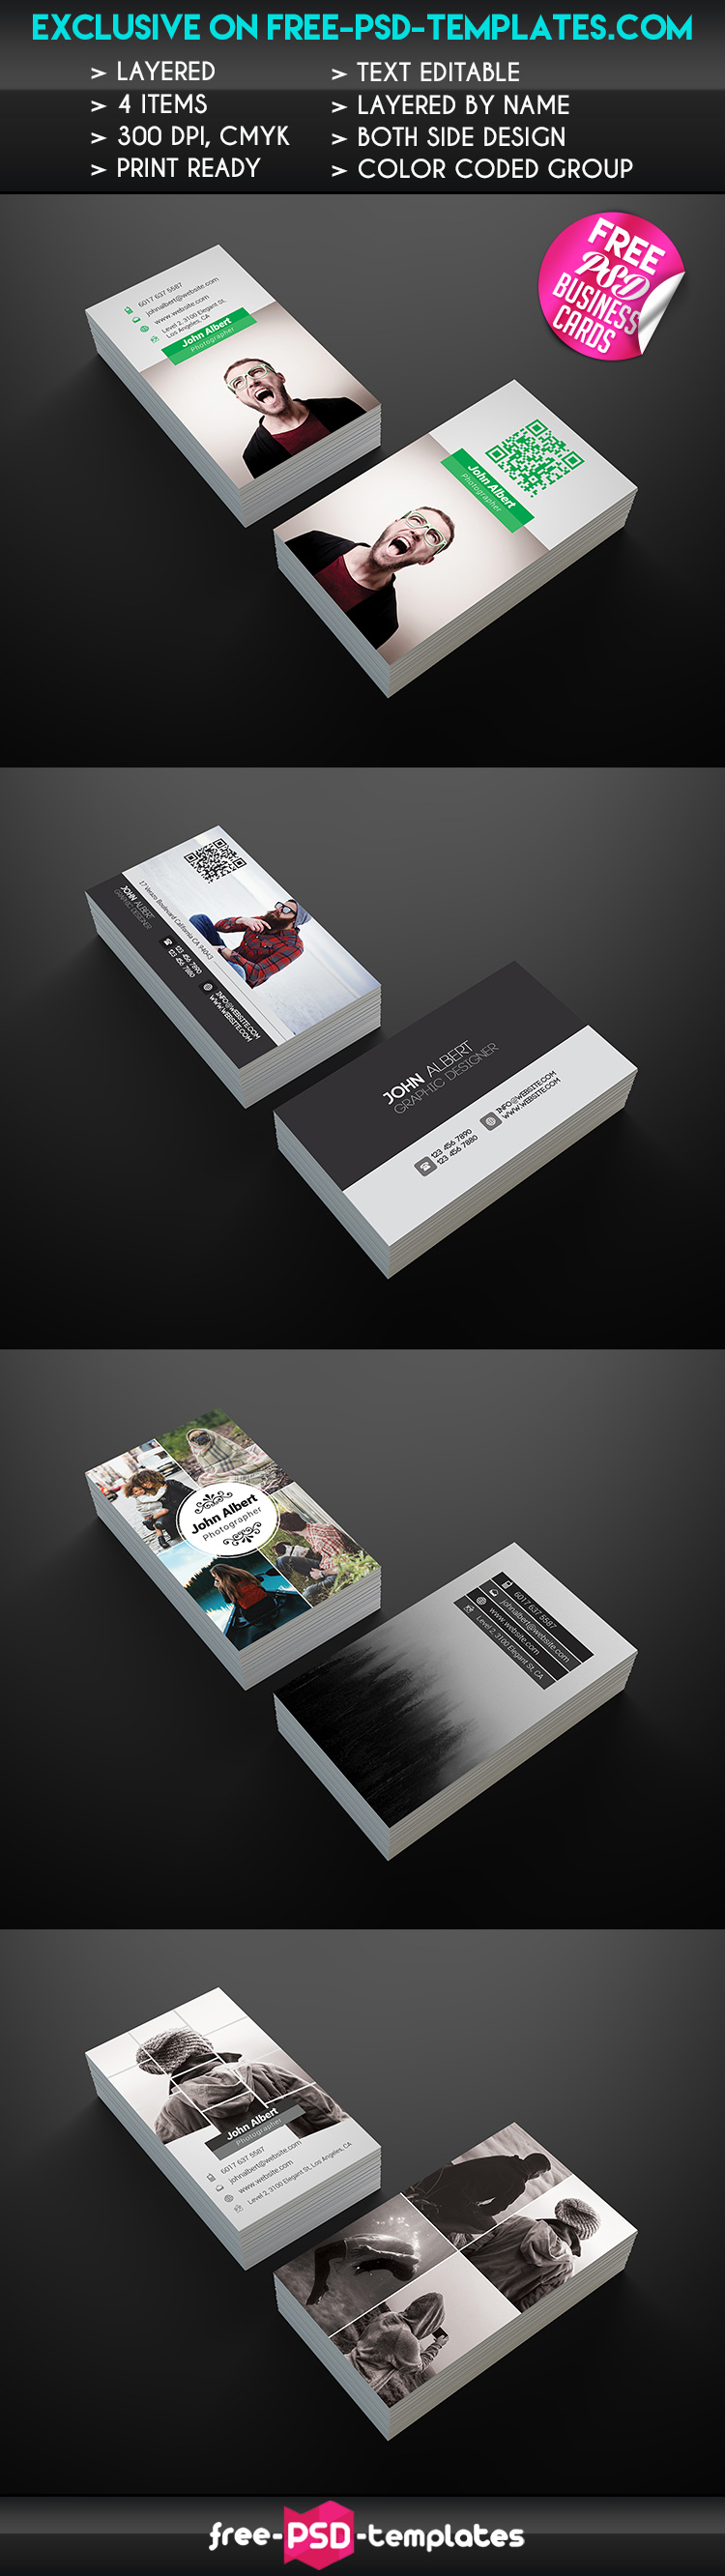 Preview_Business_Cards